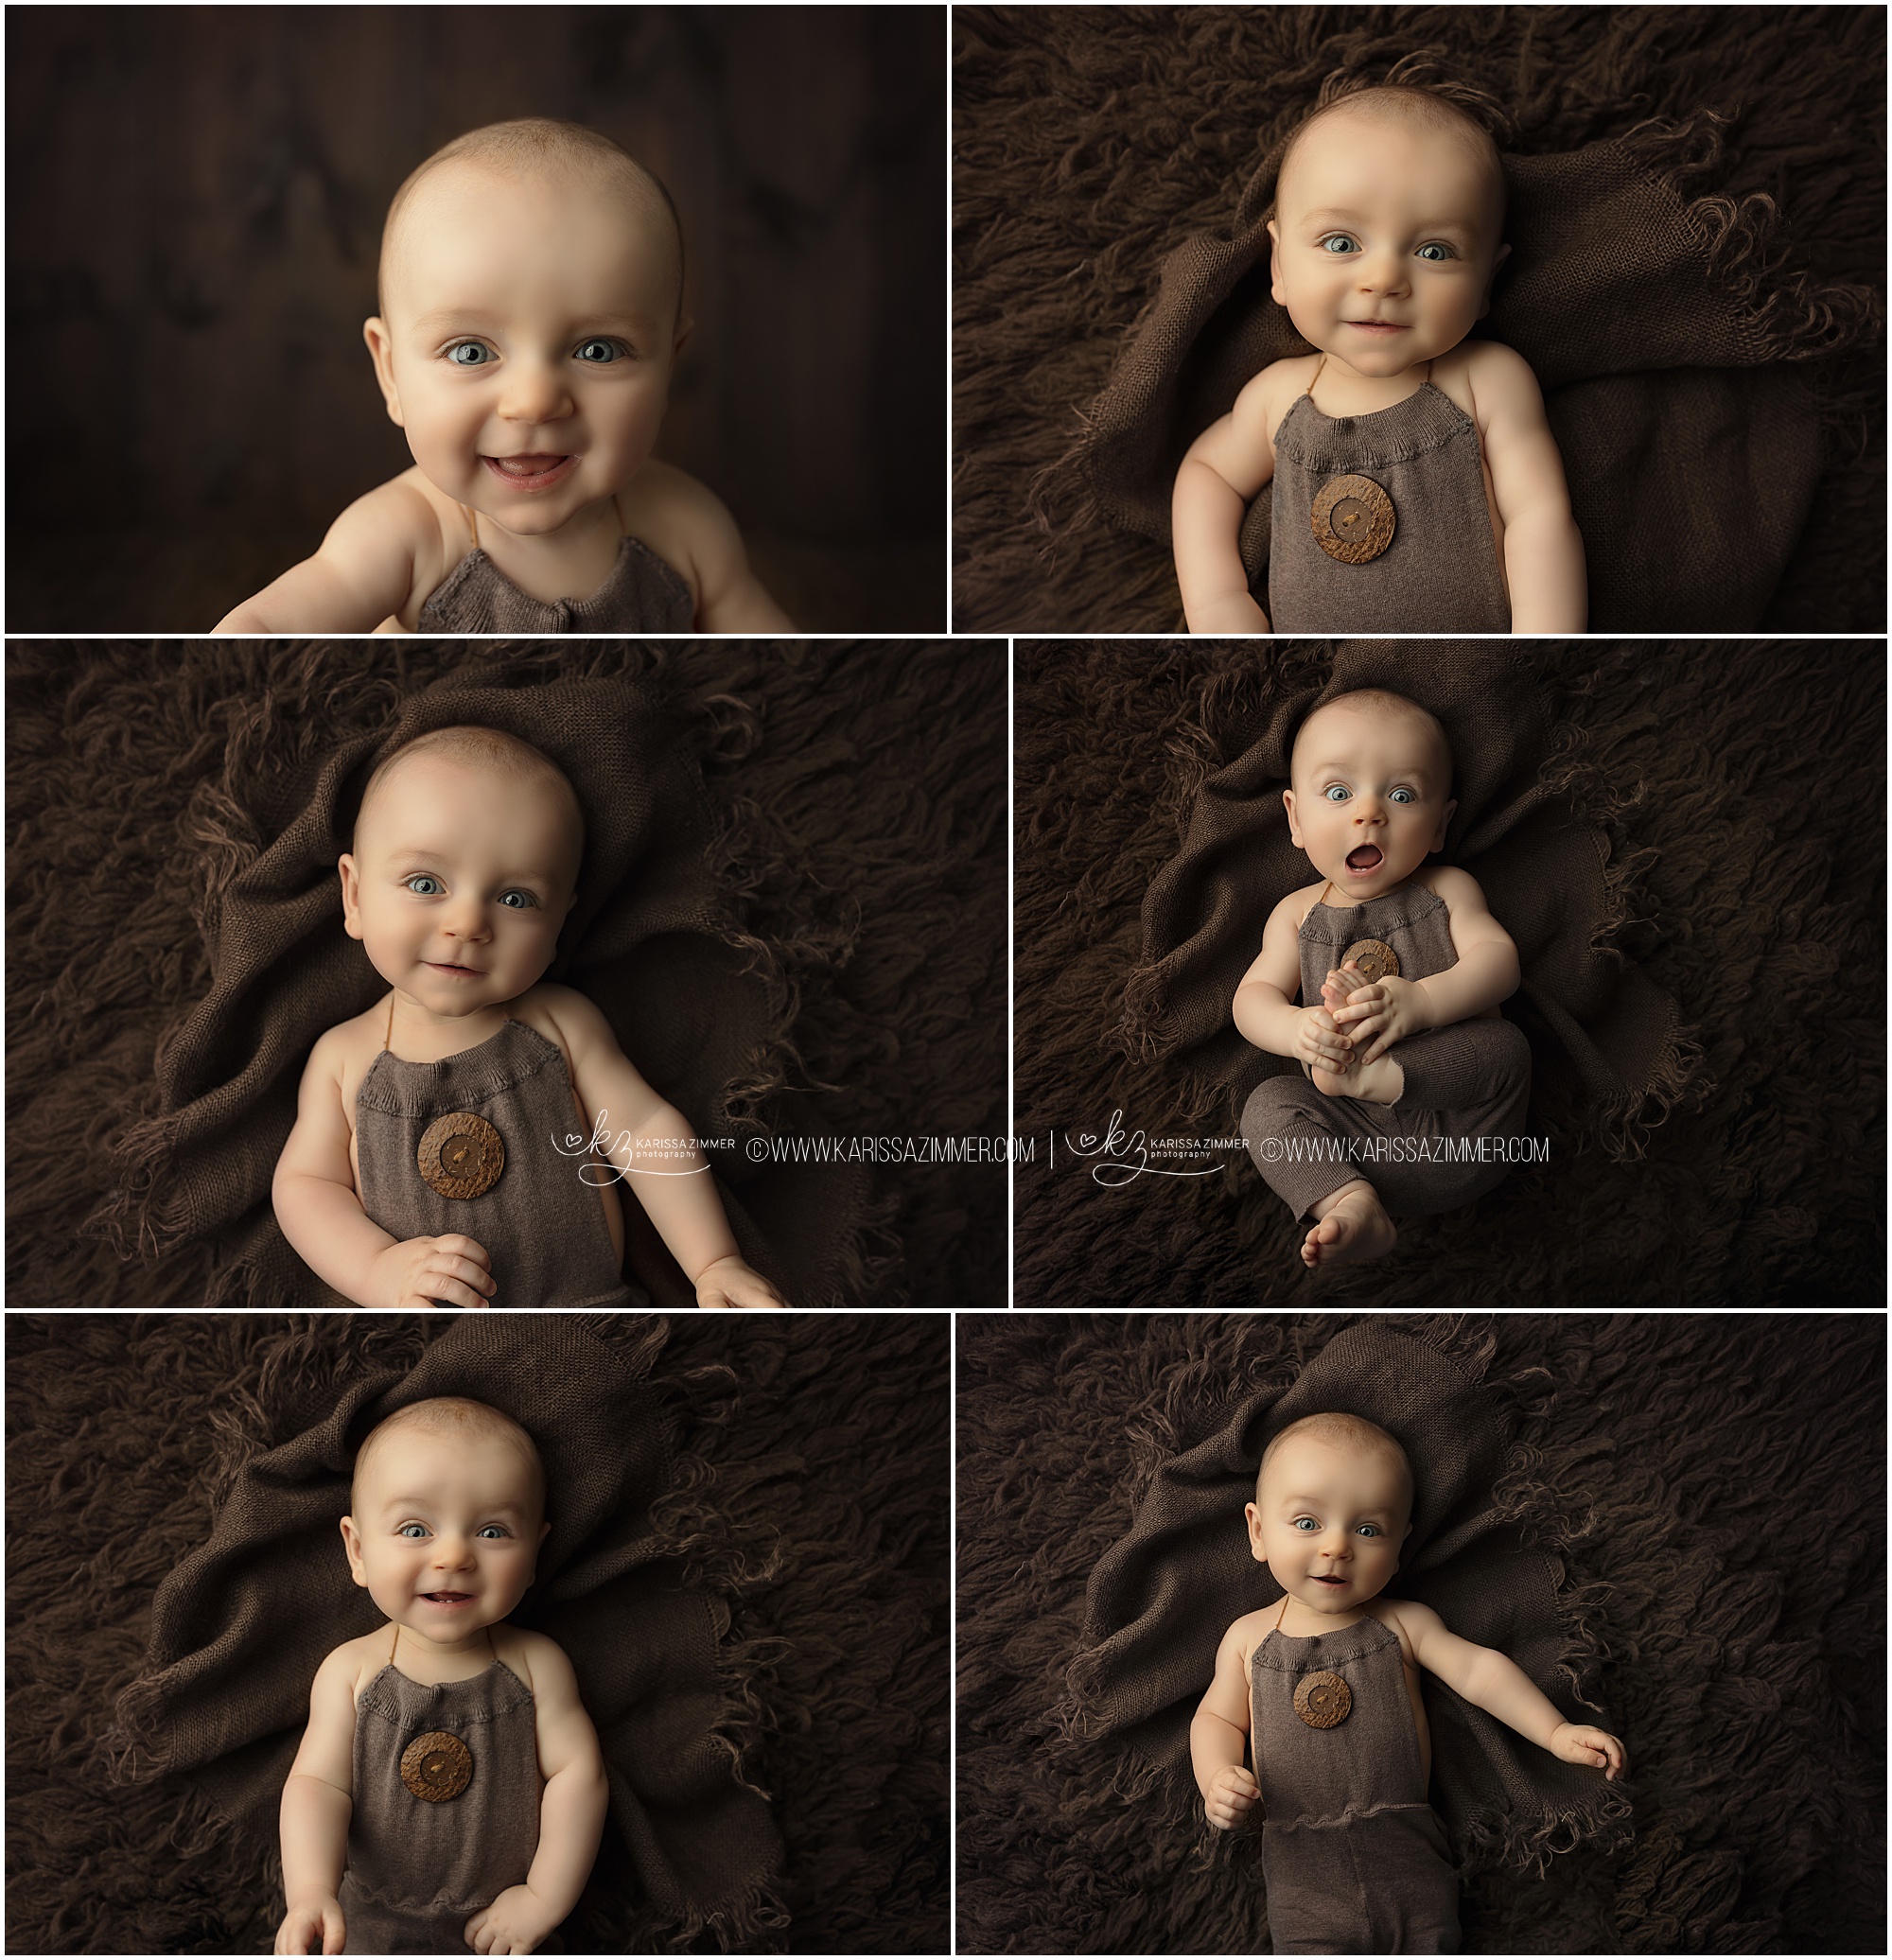 camp hill baby photographer, professional baby photos, baby photography near me